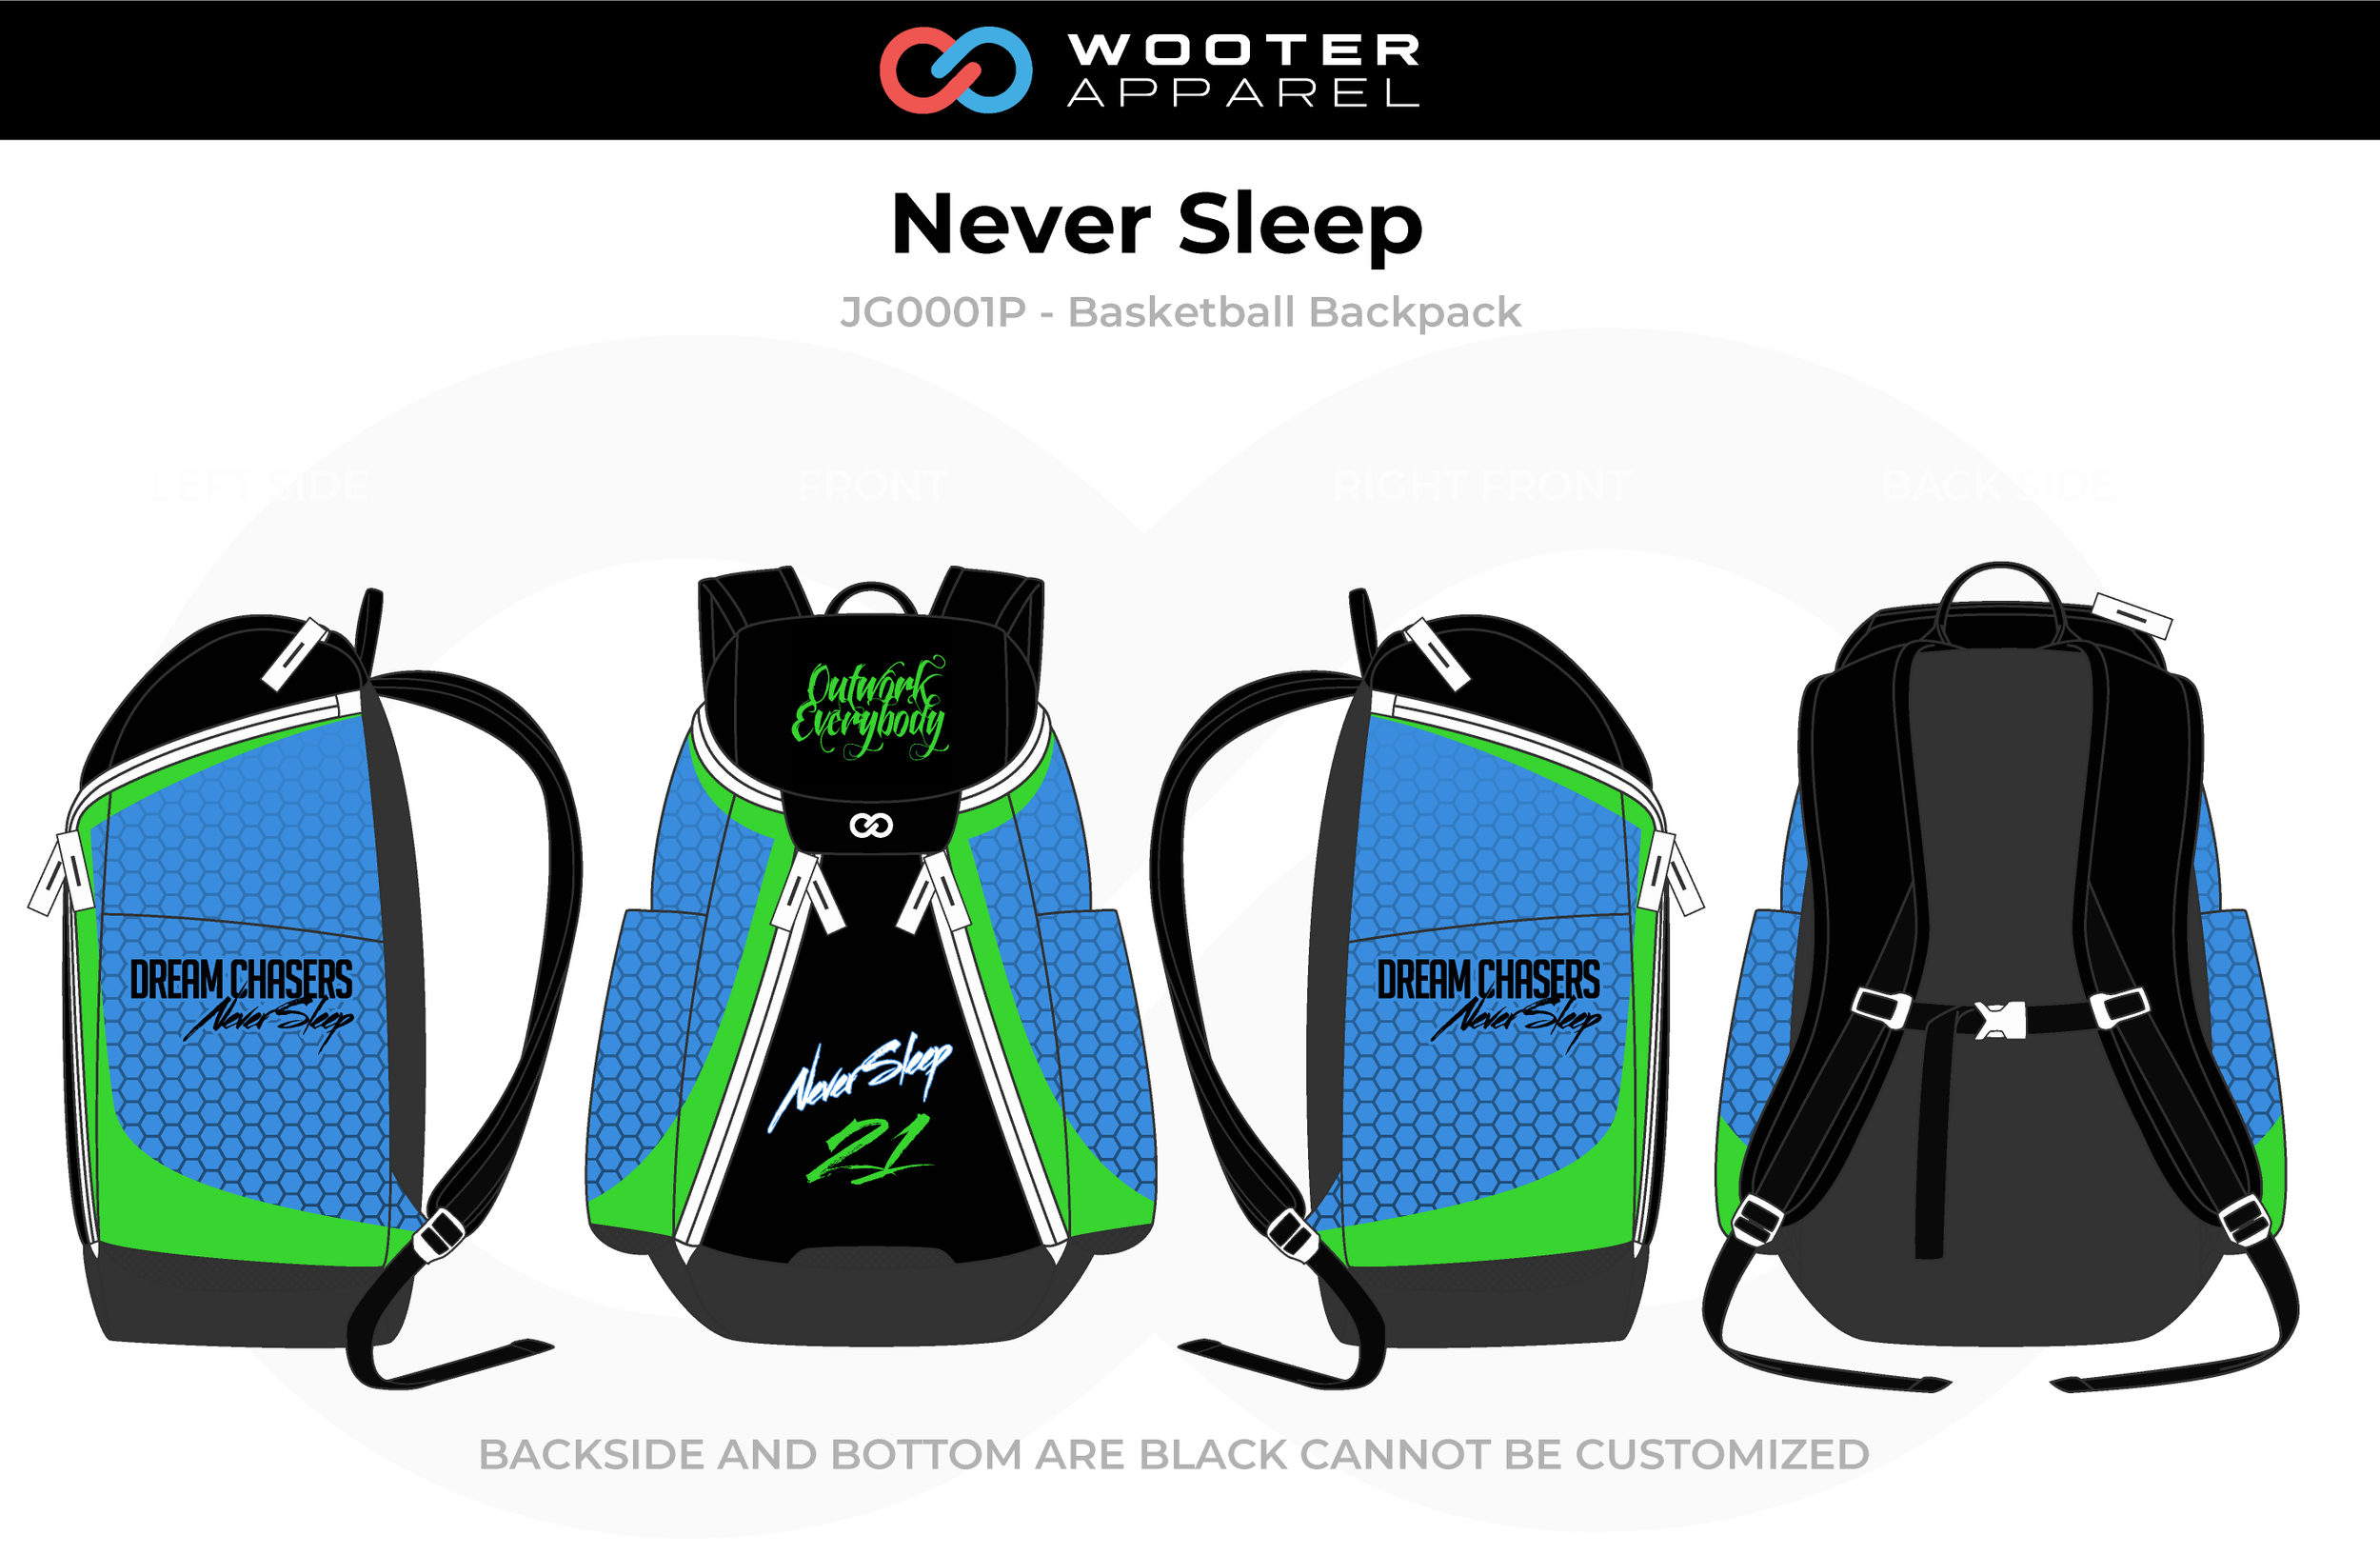 Custom Made Backpacks | Design Your Own Backpacks | Wooter Apparel